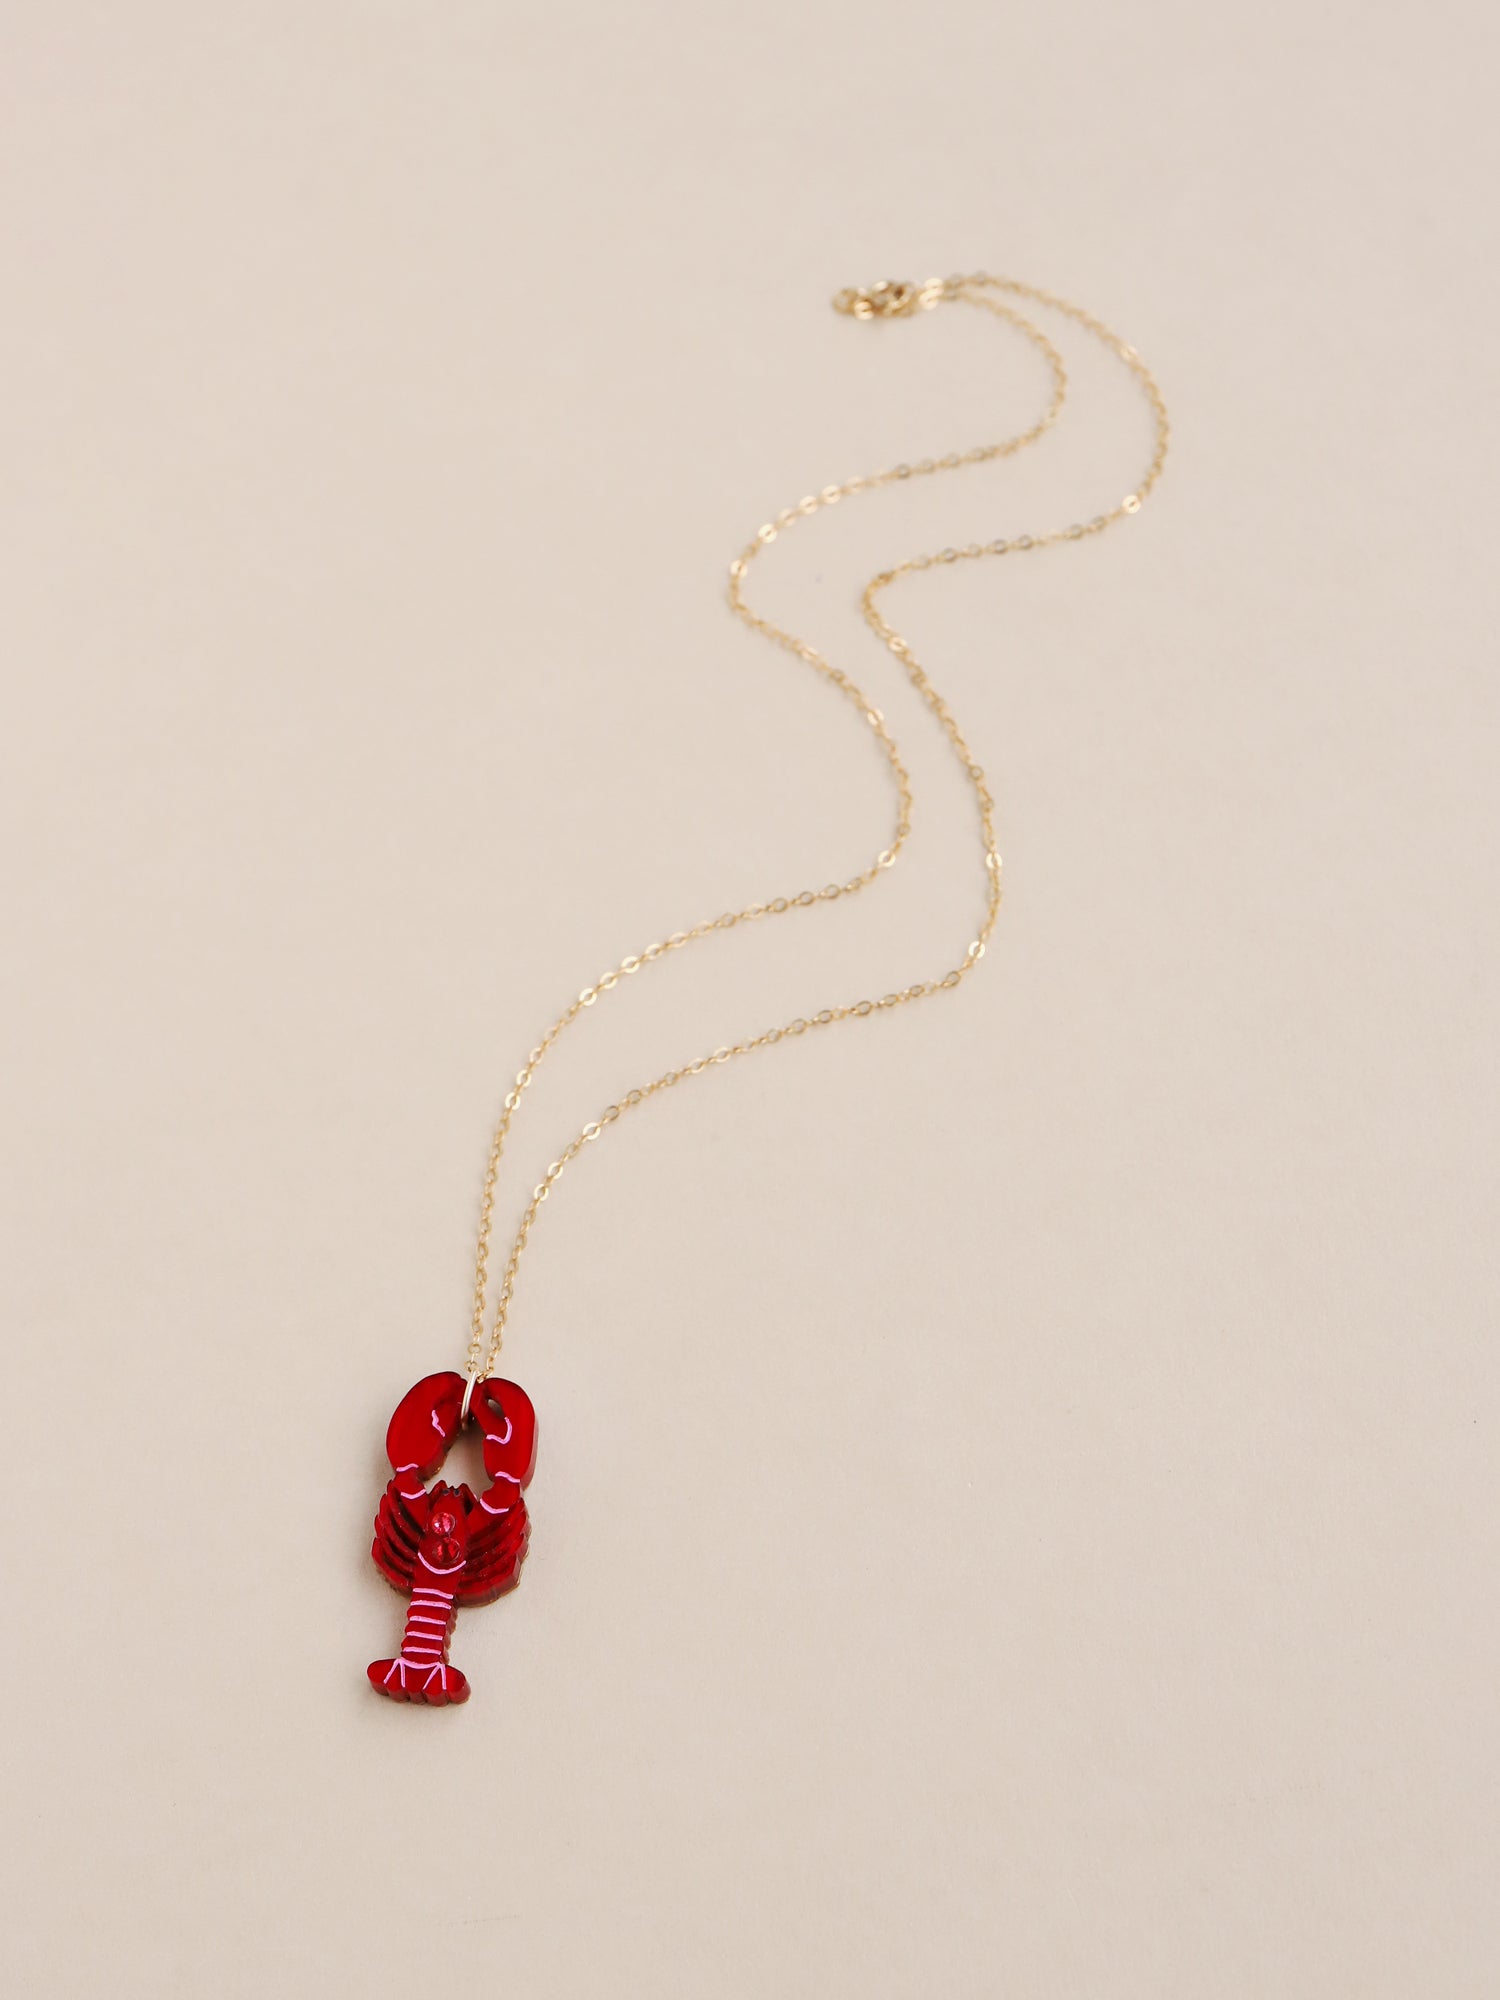  Red lobster necklace. Made from acrylic with high quality glass crystals and 14k gold-filled findings & chain. Handmade in the UK by Wolf & Moon.